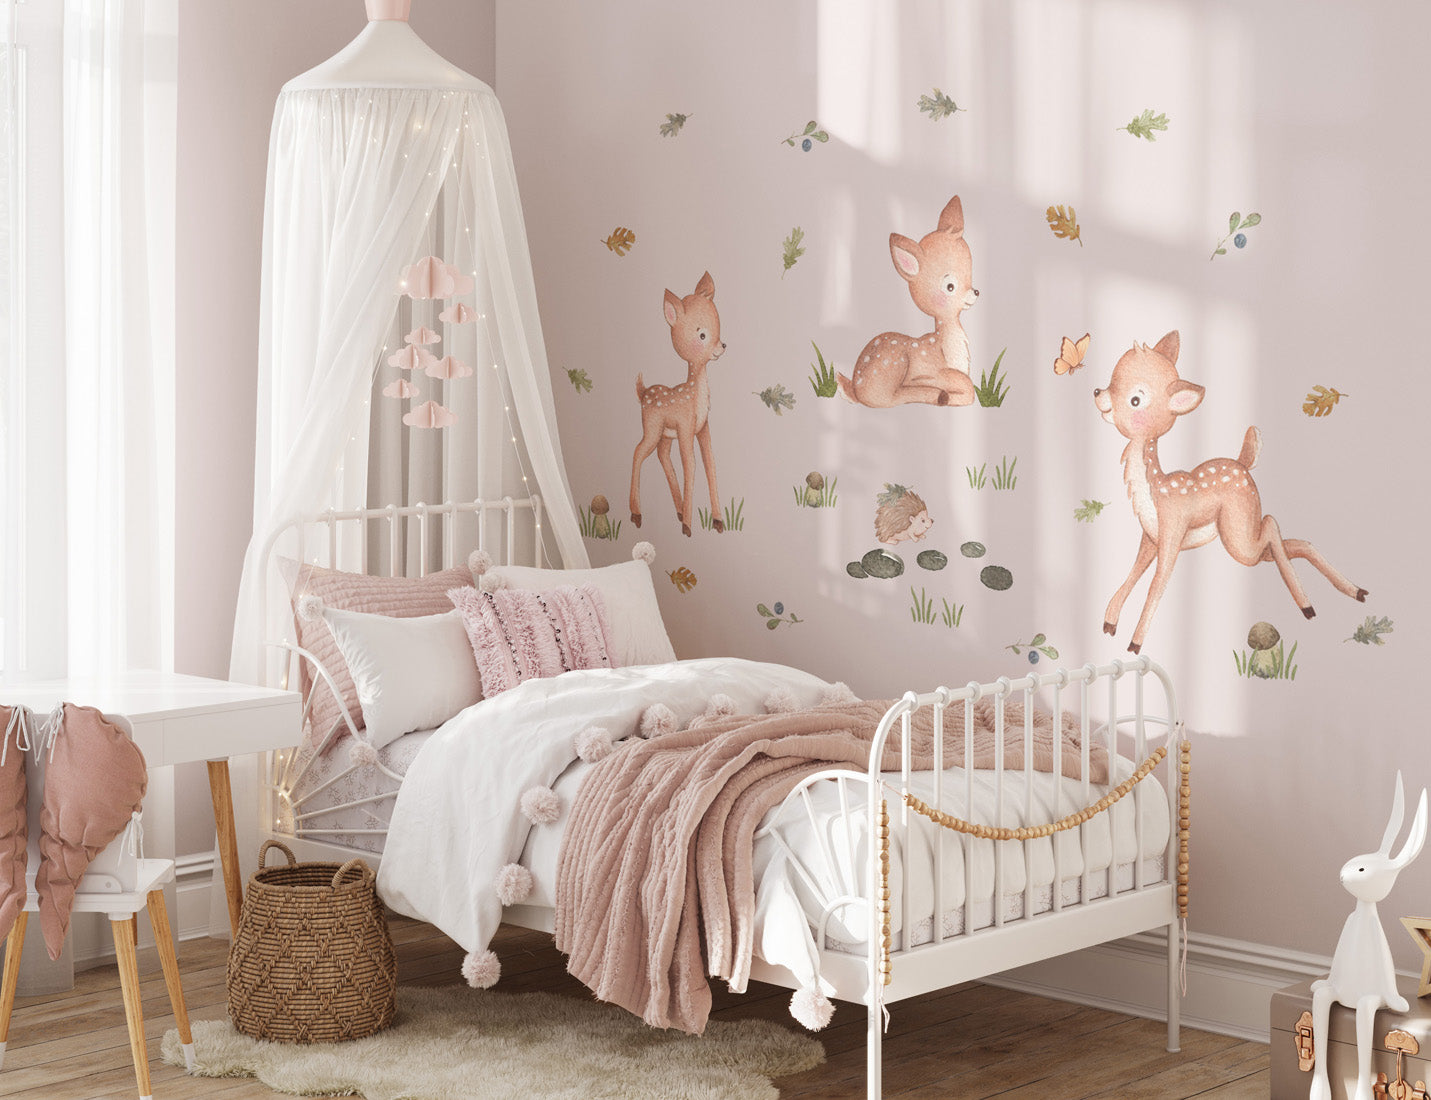 Forest animals. Deer. The girl's room wall decals.